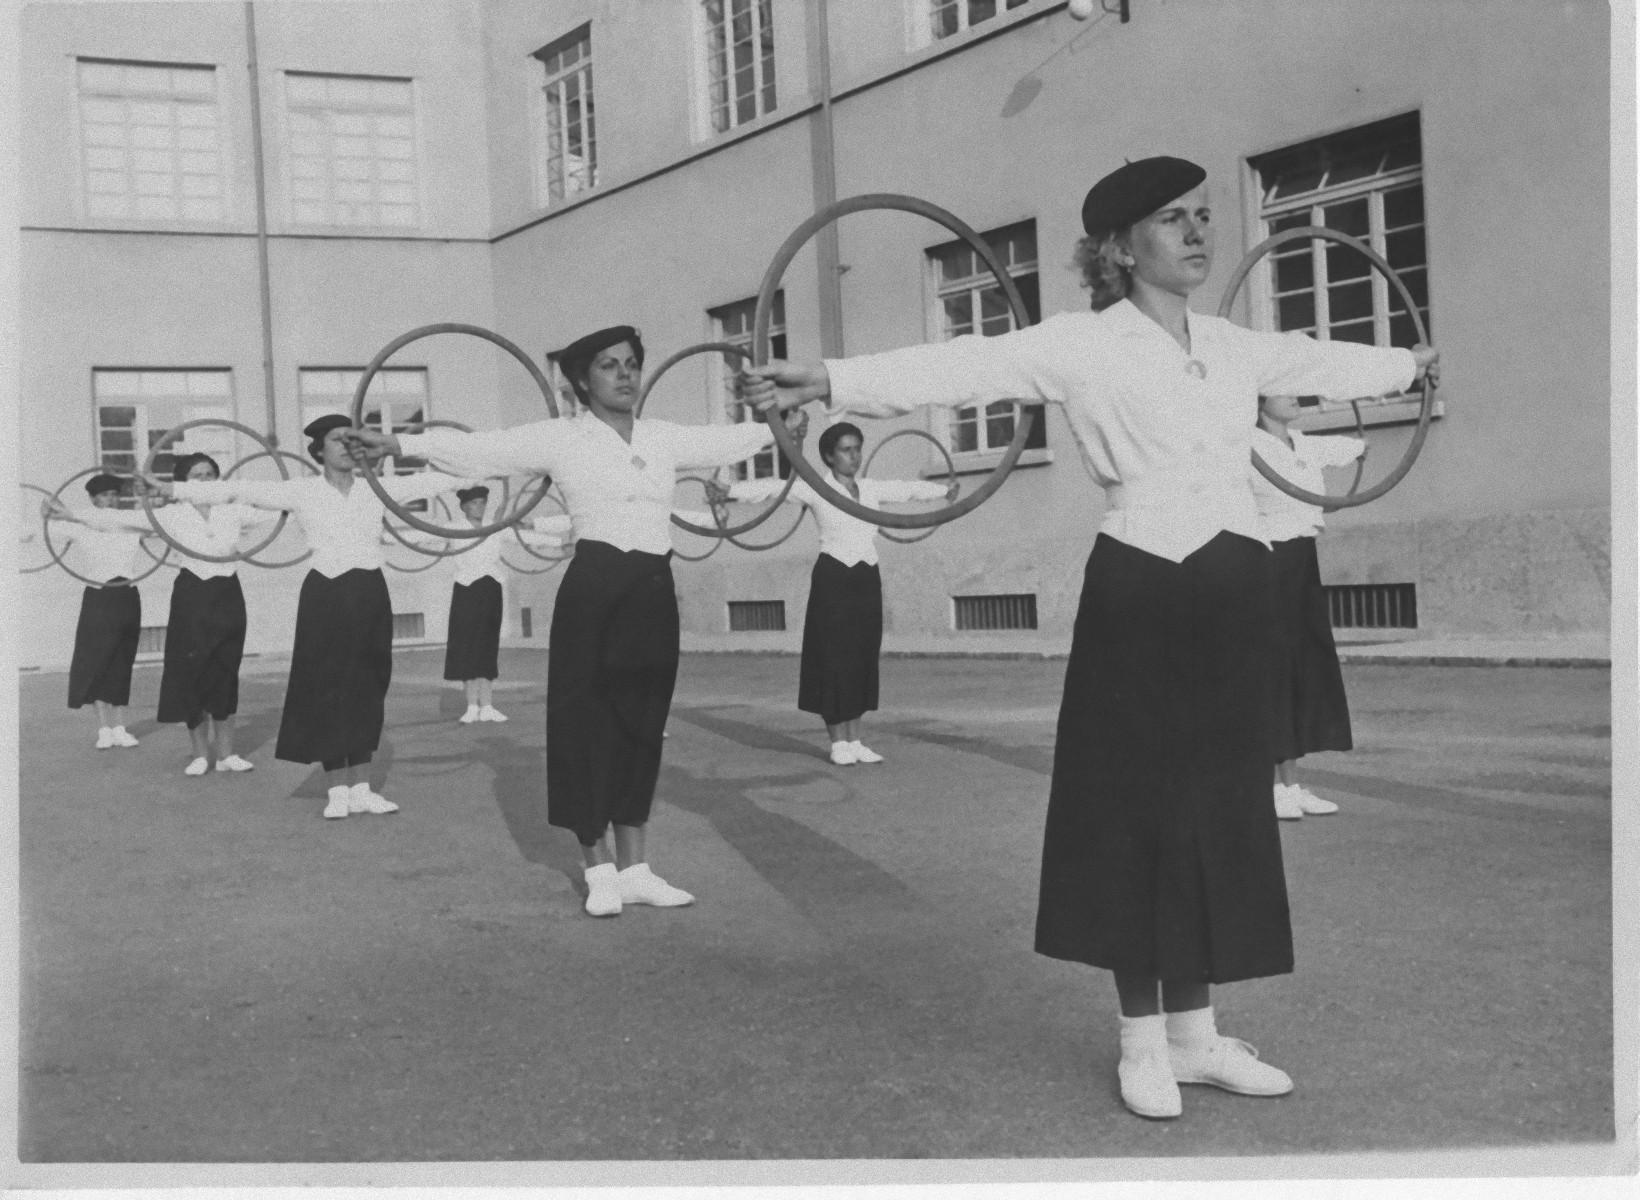 Unknown Figurative Photograph - Fascism in Italy - Exercises with Wooden Hoops - Vintage b/w Photo - 1934 ca.